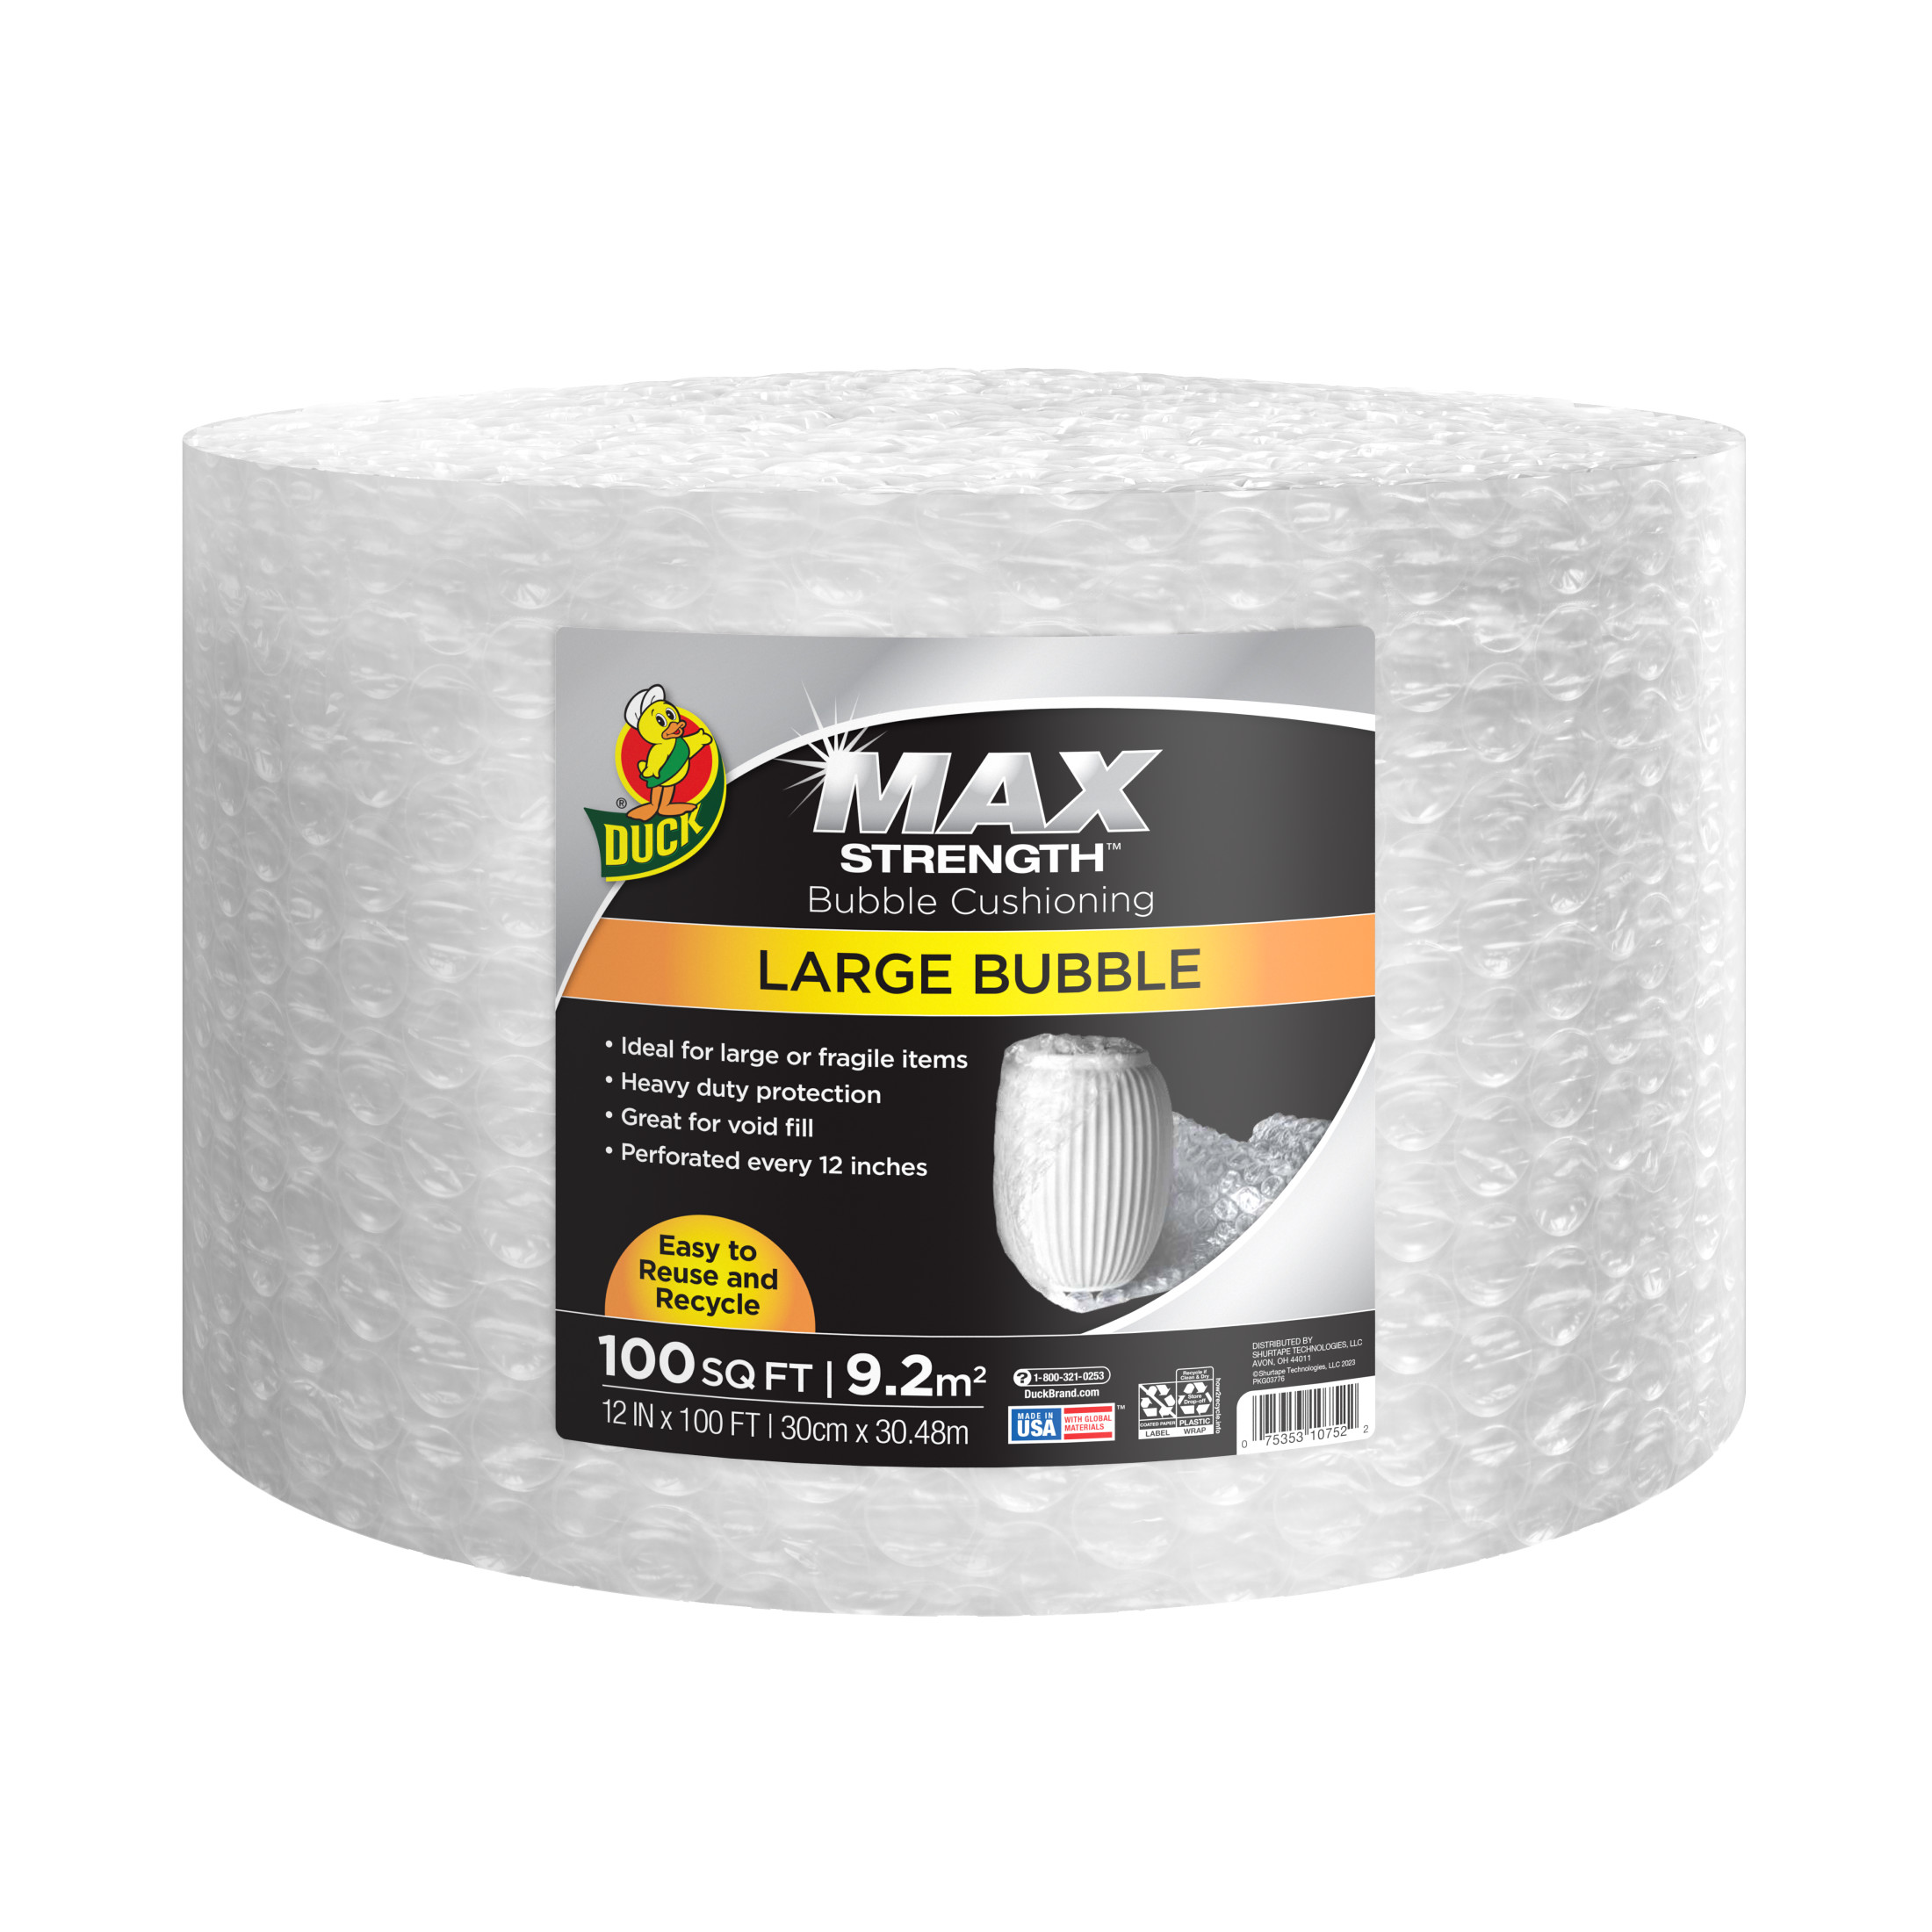 Duck Max Strength Large Bubble Cushioning Wrap, 12 in x 100 ft, Clear (287223) - image 1 of 10